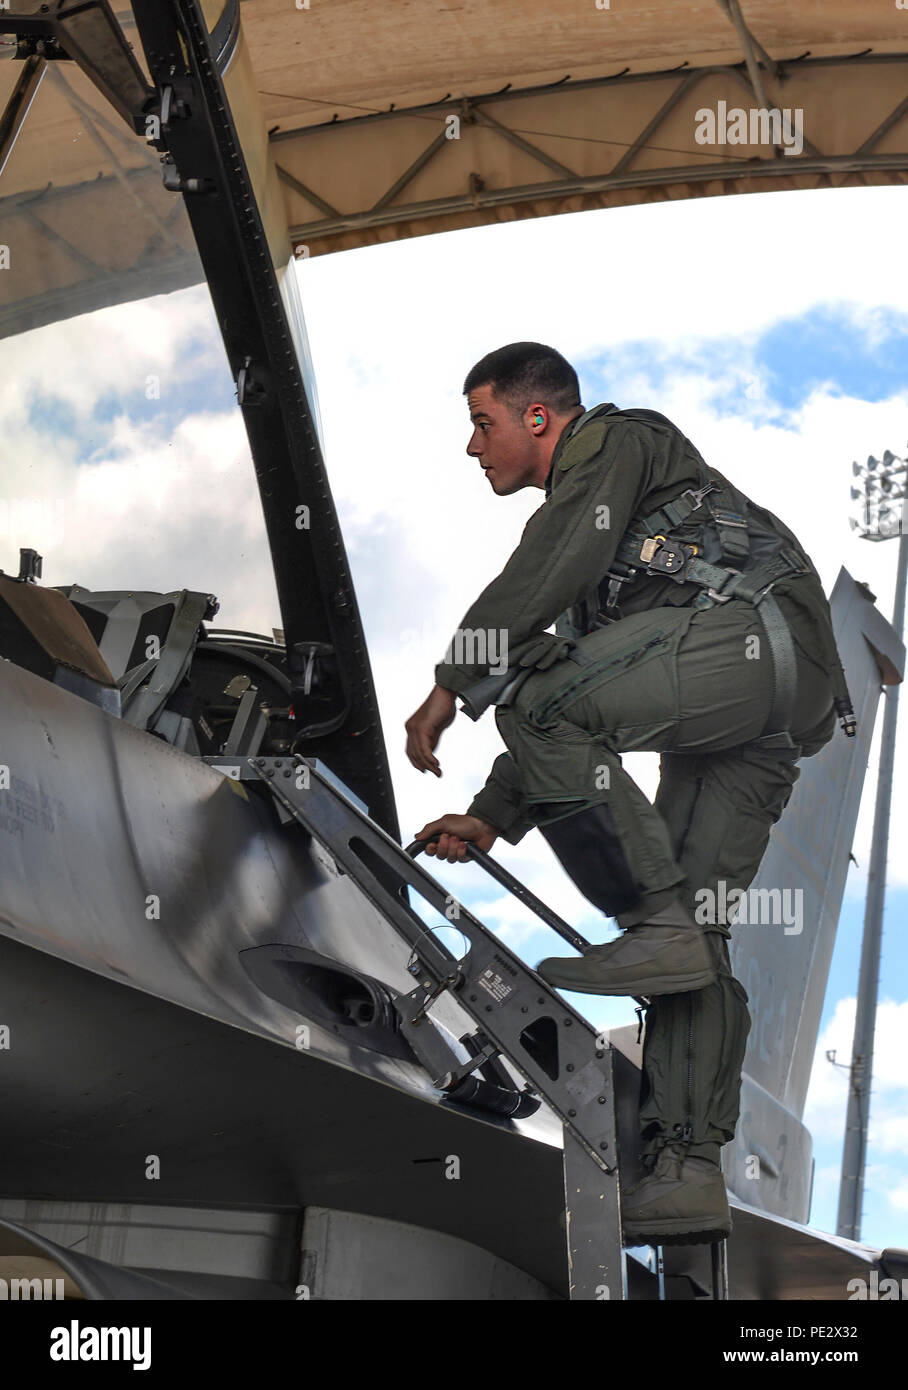 Senior Airman Samuel Ellis, 33rd Operations Group intelligence analyst, climbs on board an F-16 Fighting Falcon assigned to the South Carolina Air National Guard’s 169th Fighter Wing for an incentive flight at Eglin Air Force Base, Fla., Sept. 17, 2015. The 169th FW spent two weeks conducting fifth generation integration training with the 58th Fighter Squadron. (U.S. Air Force Photo/Senior Airman Andrea Posey) Stock Photo